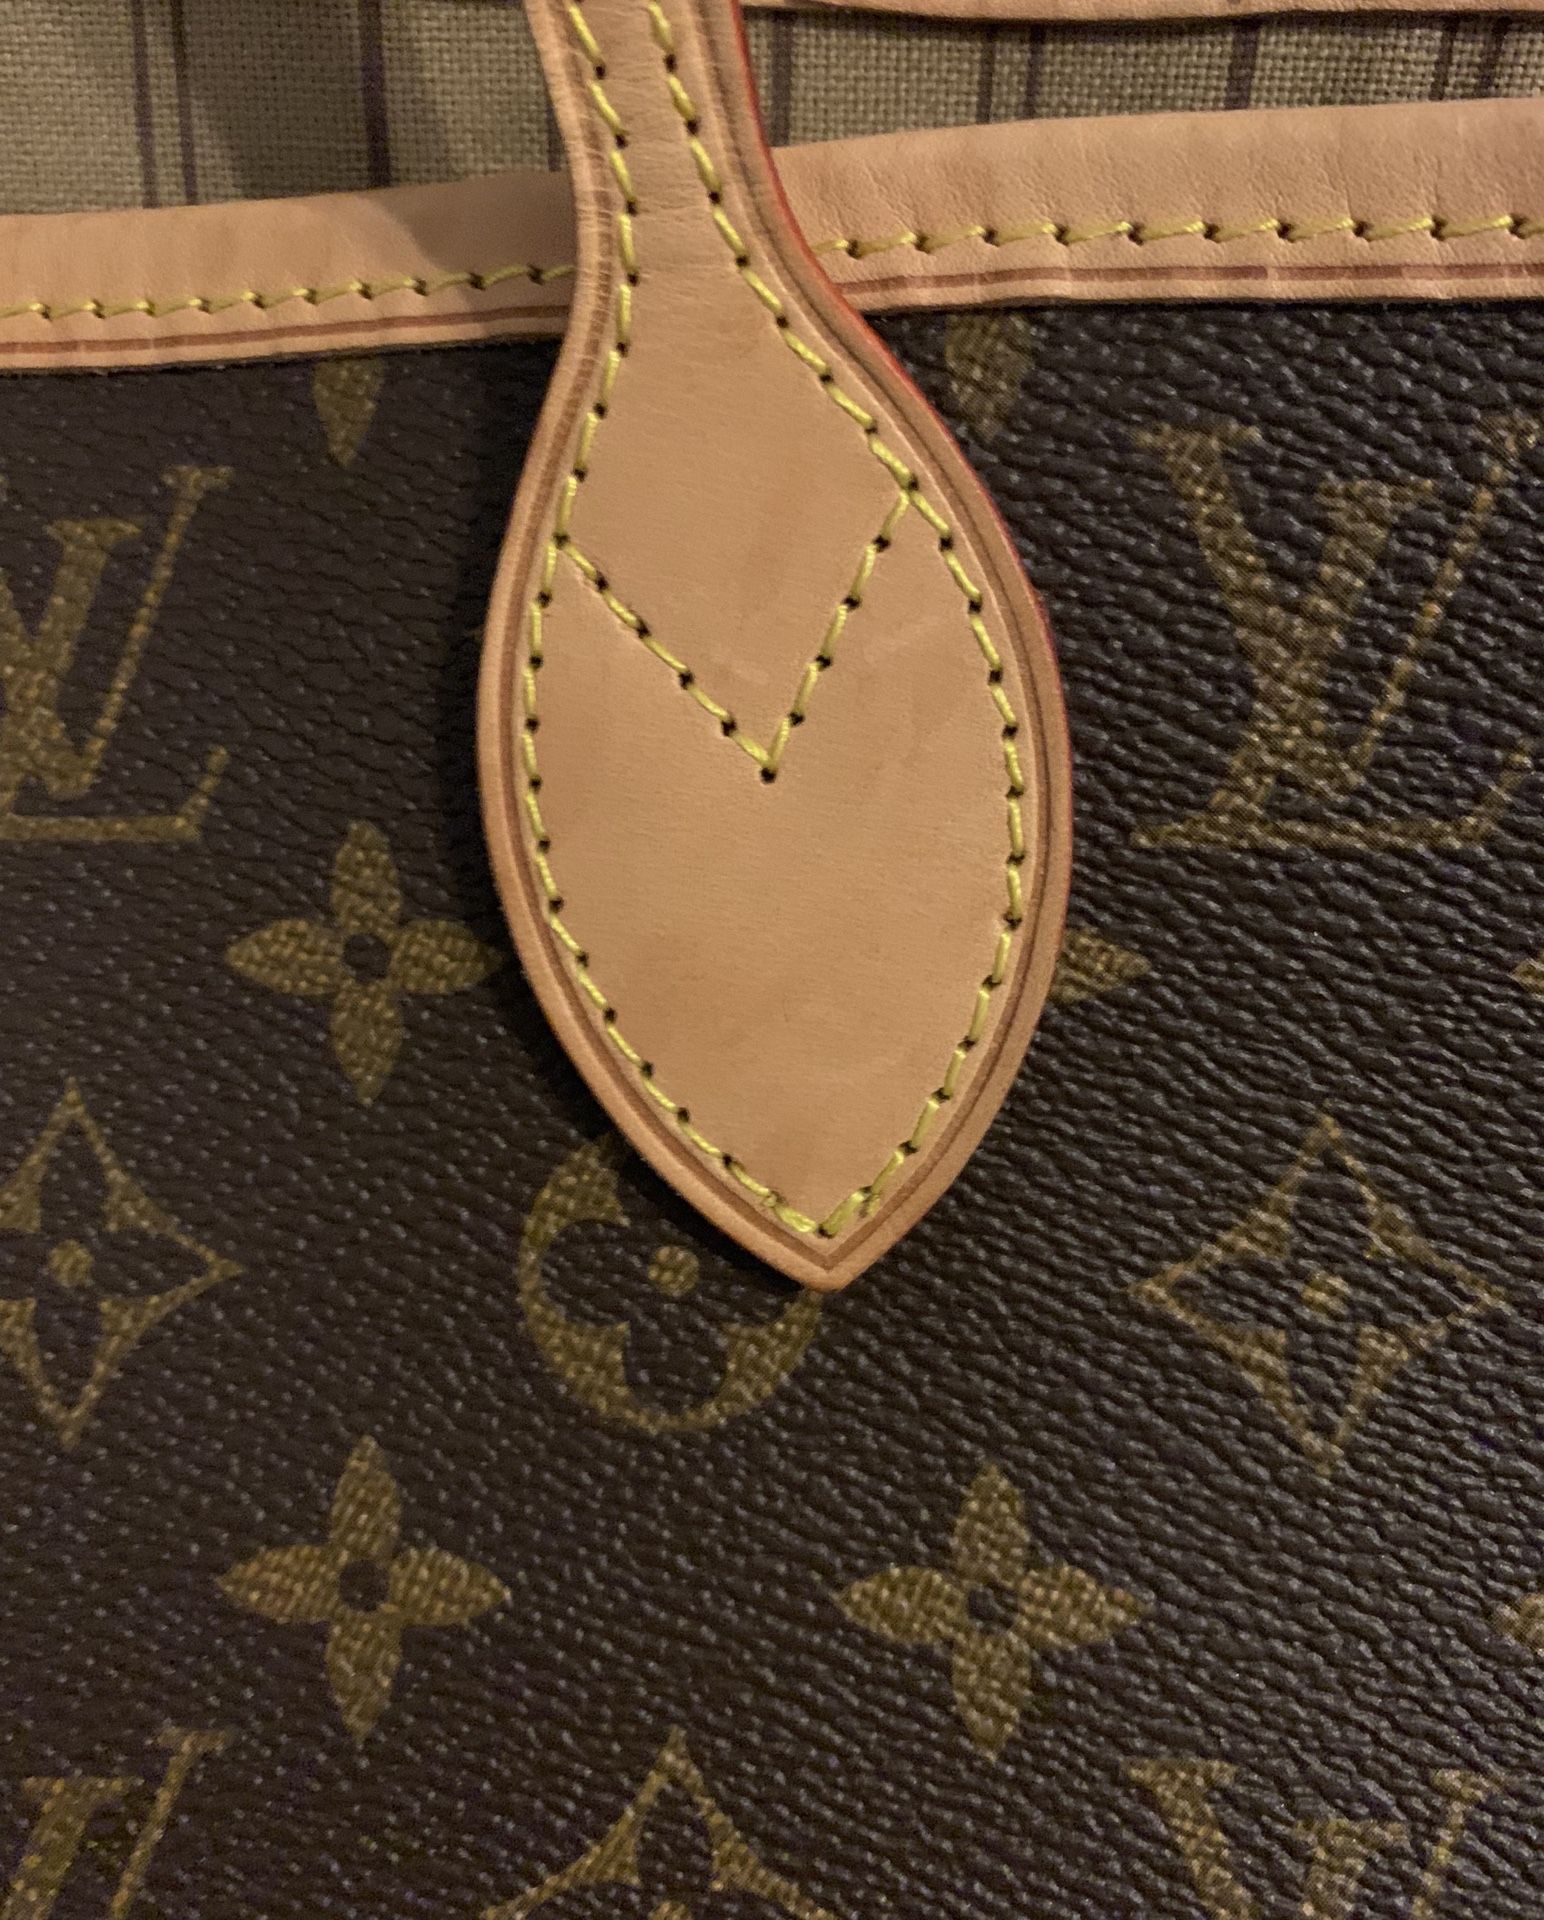 Louis Vuitton Neverfull MM for Sale in Everett, WA - OfferUp